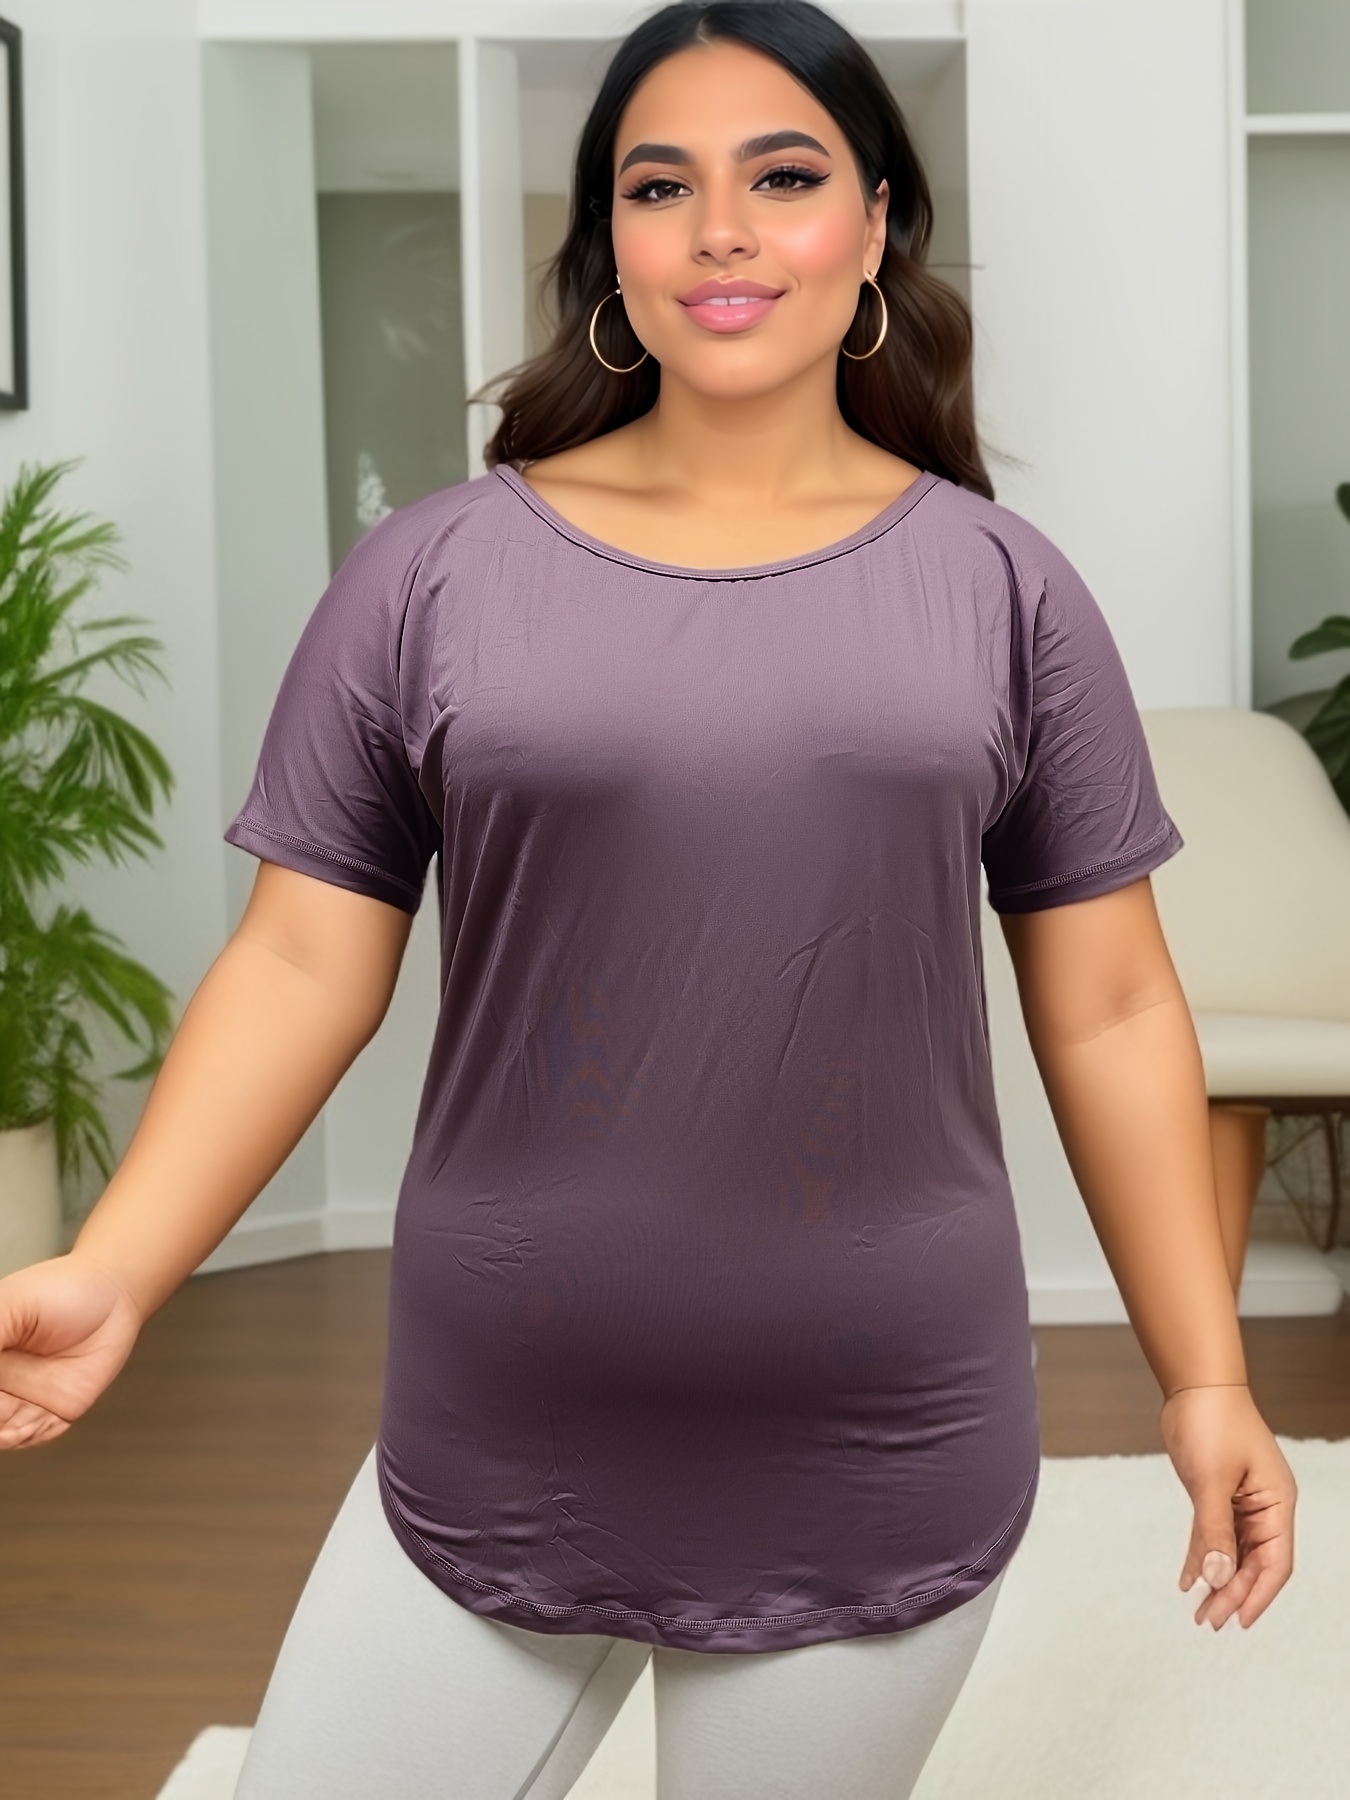 Plus Size Sports Top, Women's Plus Solid Short Sleeve Round Neck Stretchy  Yoga Workout Tee